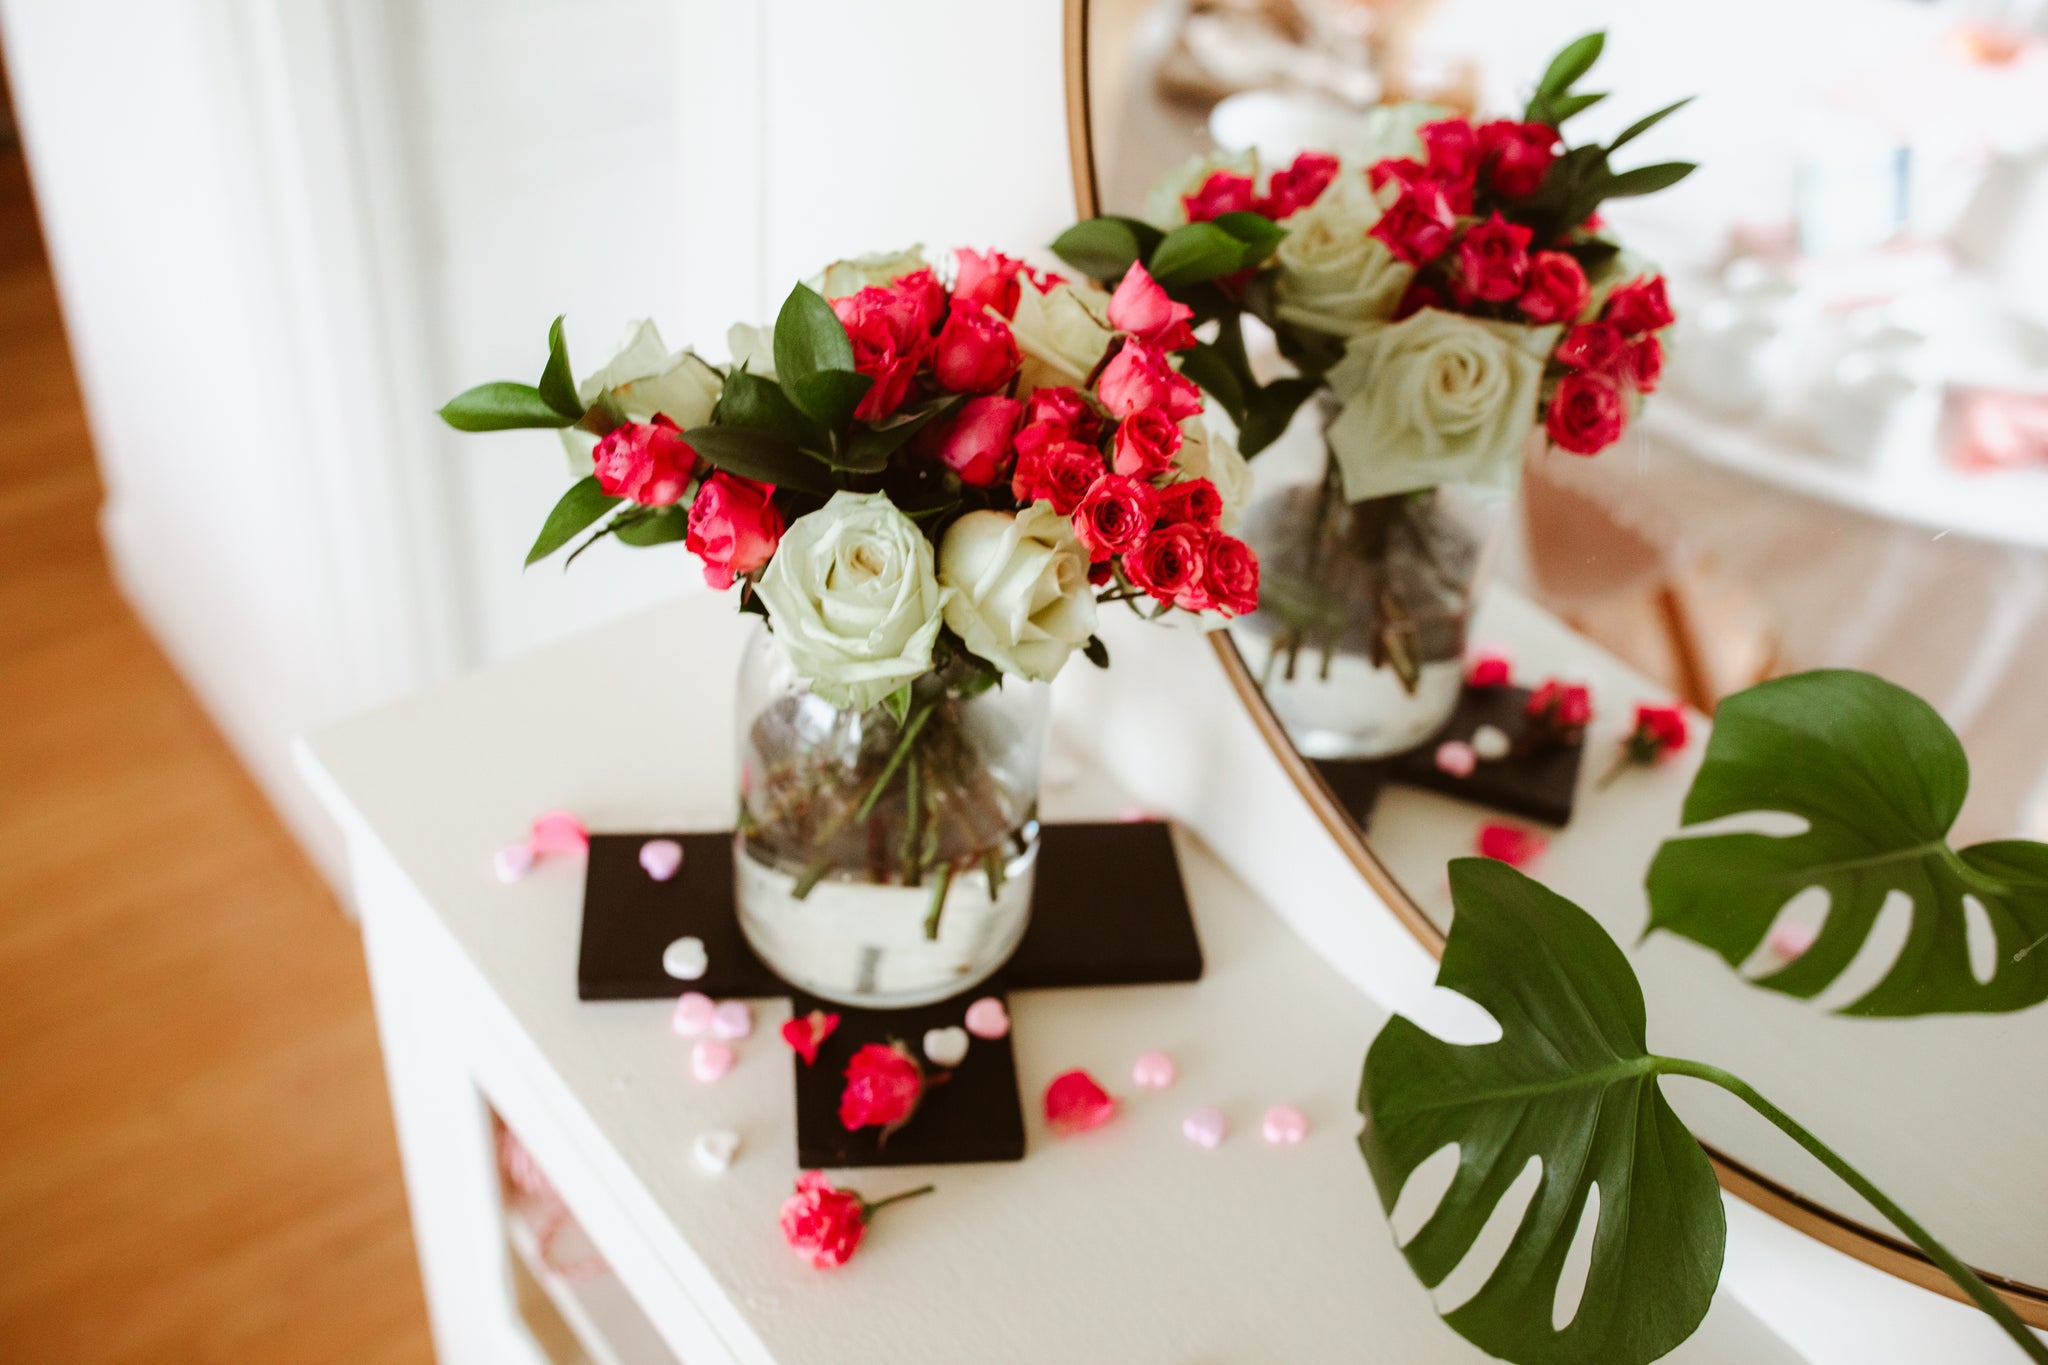 Valentine's Day Decor Ideas For Your Home - Today's Homeowner